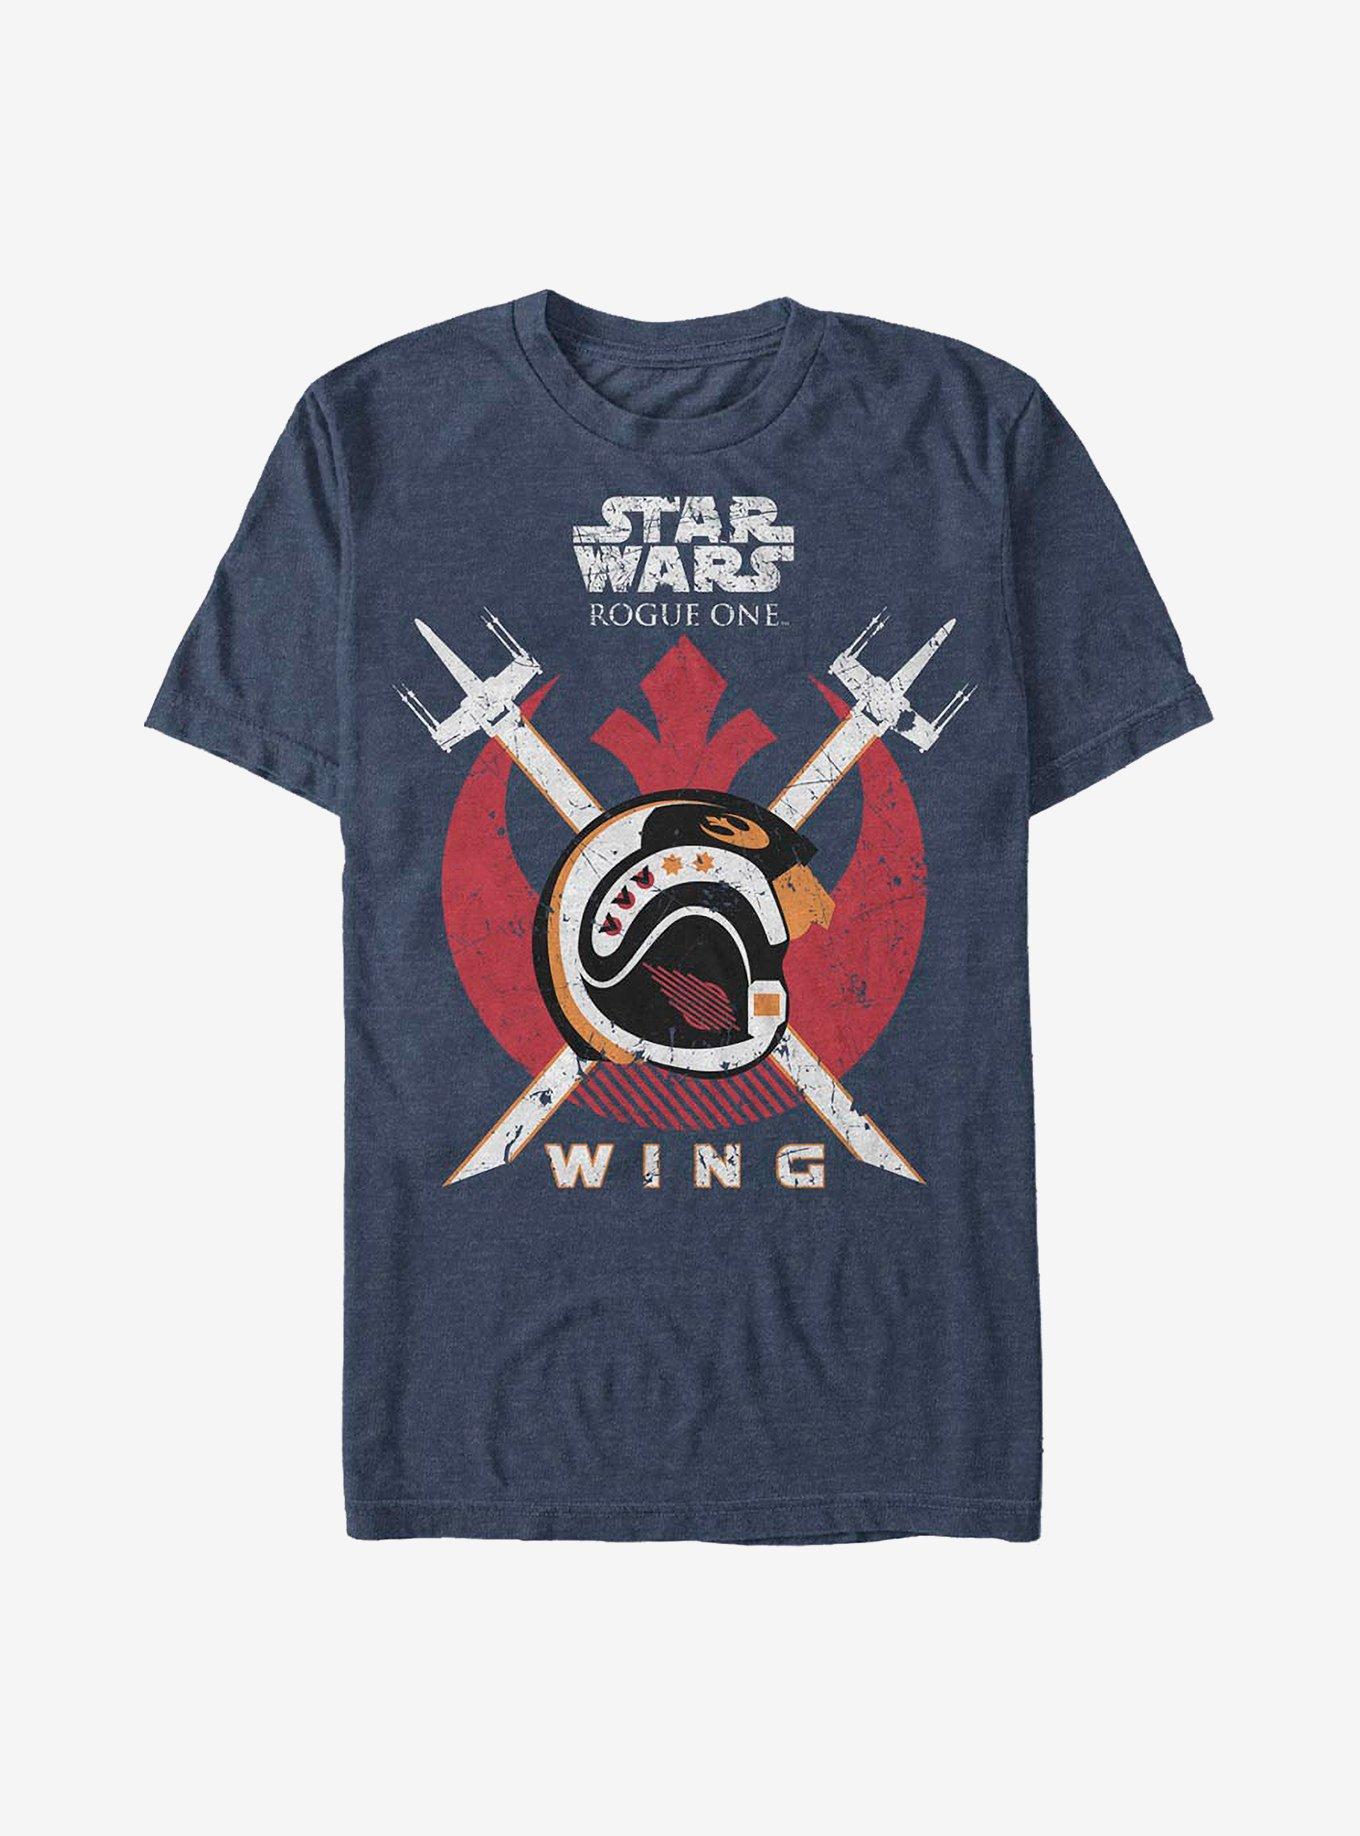 Star Wars Rogue One: A Star Wars Story Rogue One T-Shirt, NAVY HTR, hi-res